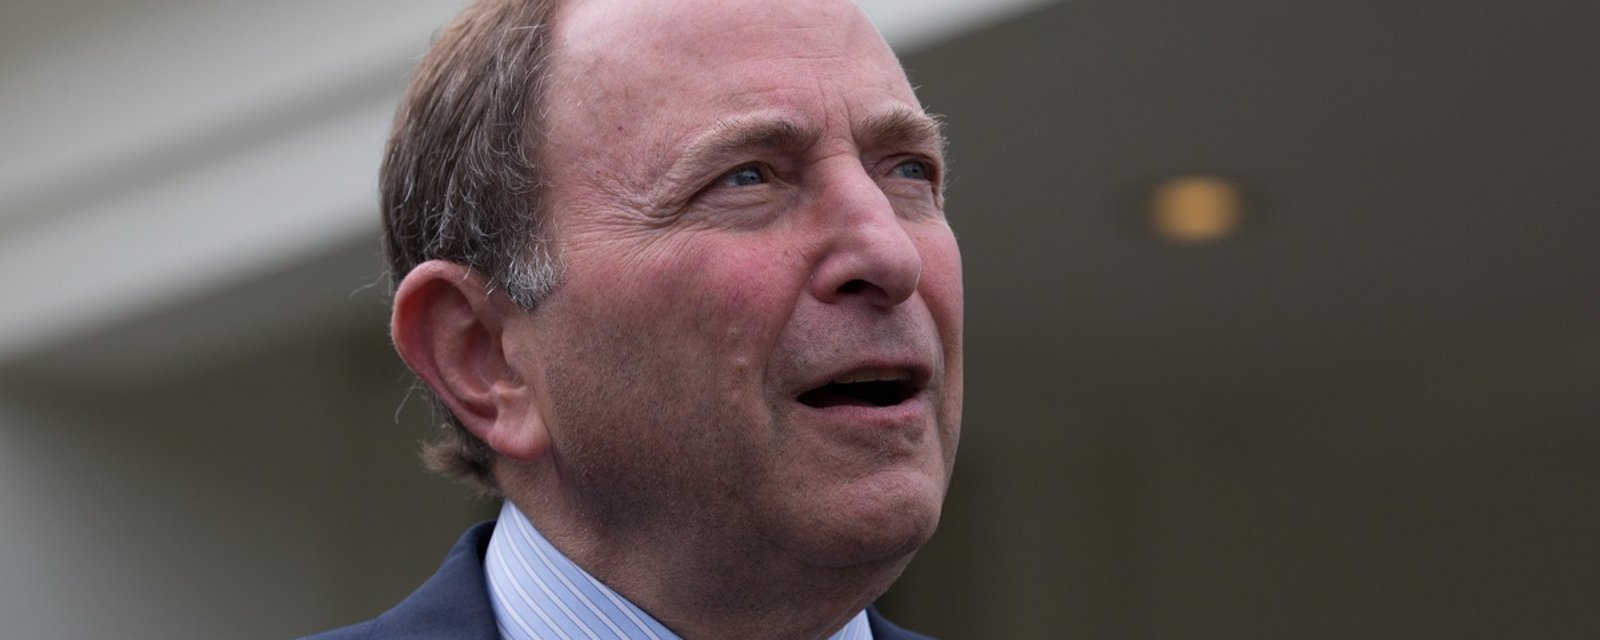 Bettman hints at bringing back highly controversial change to the NHL.